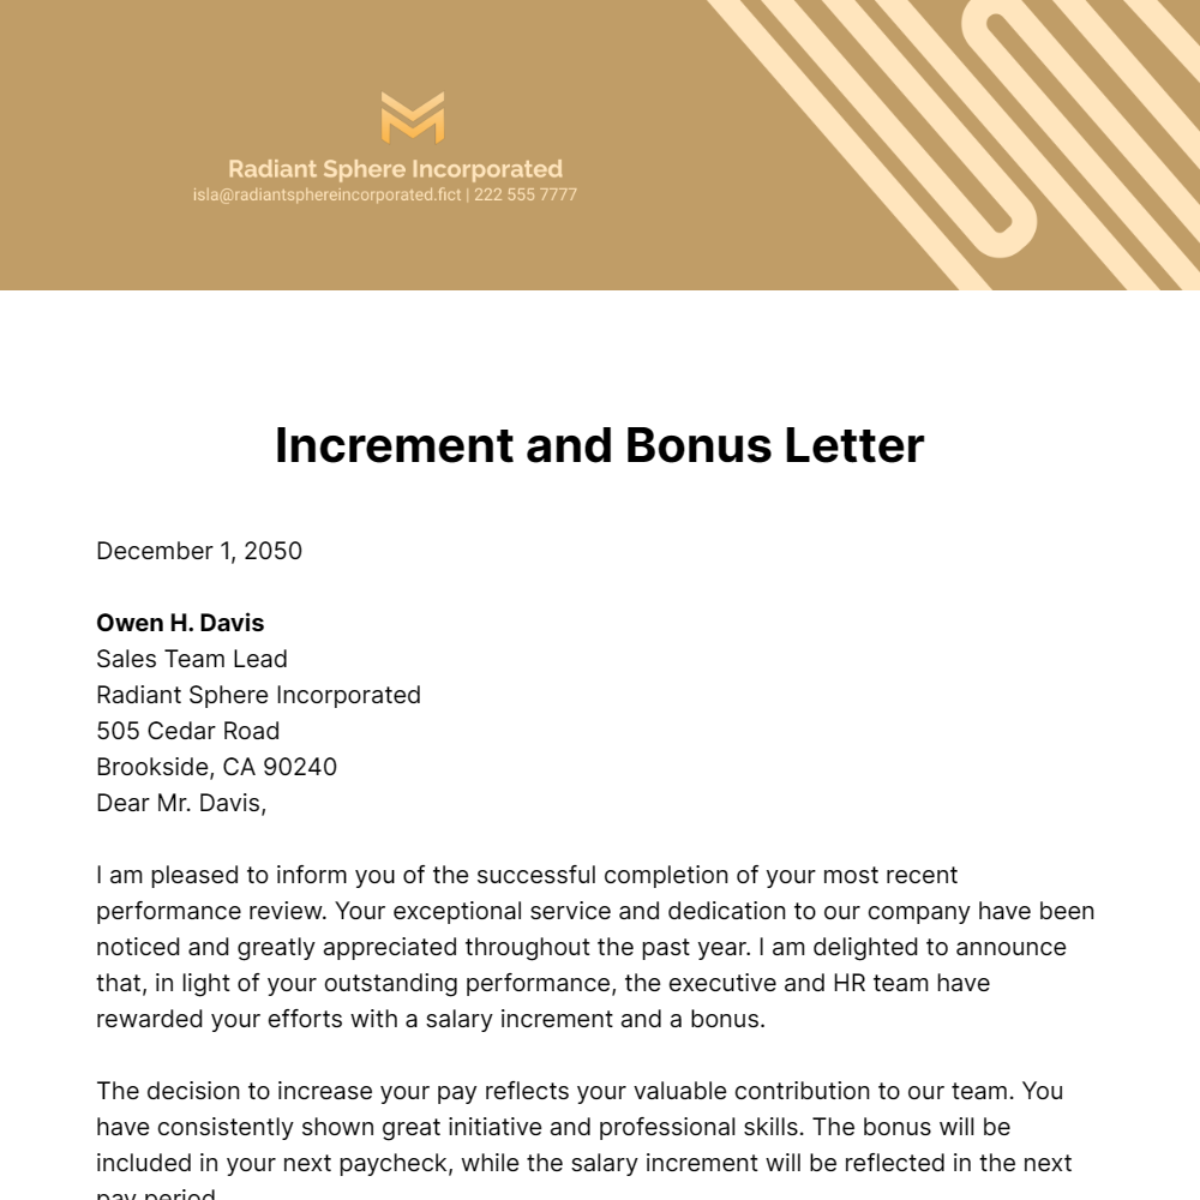 Increment and Bonus Letter Template